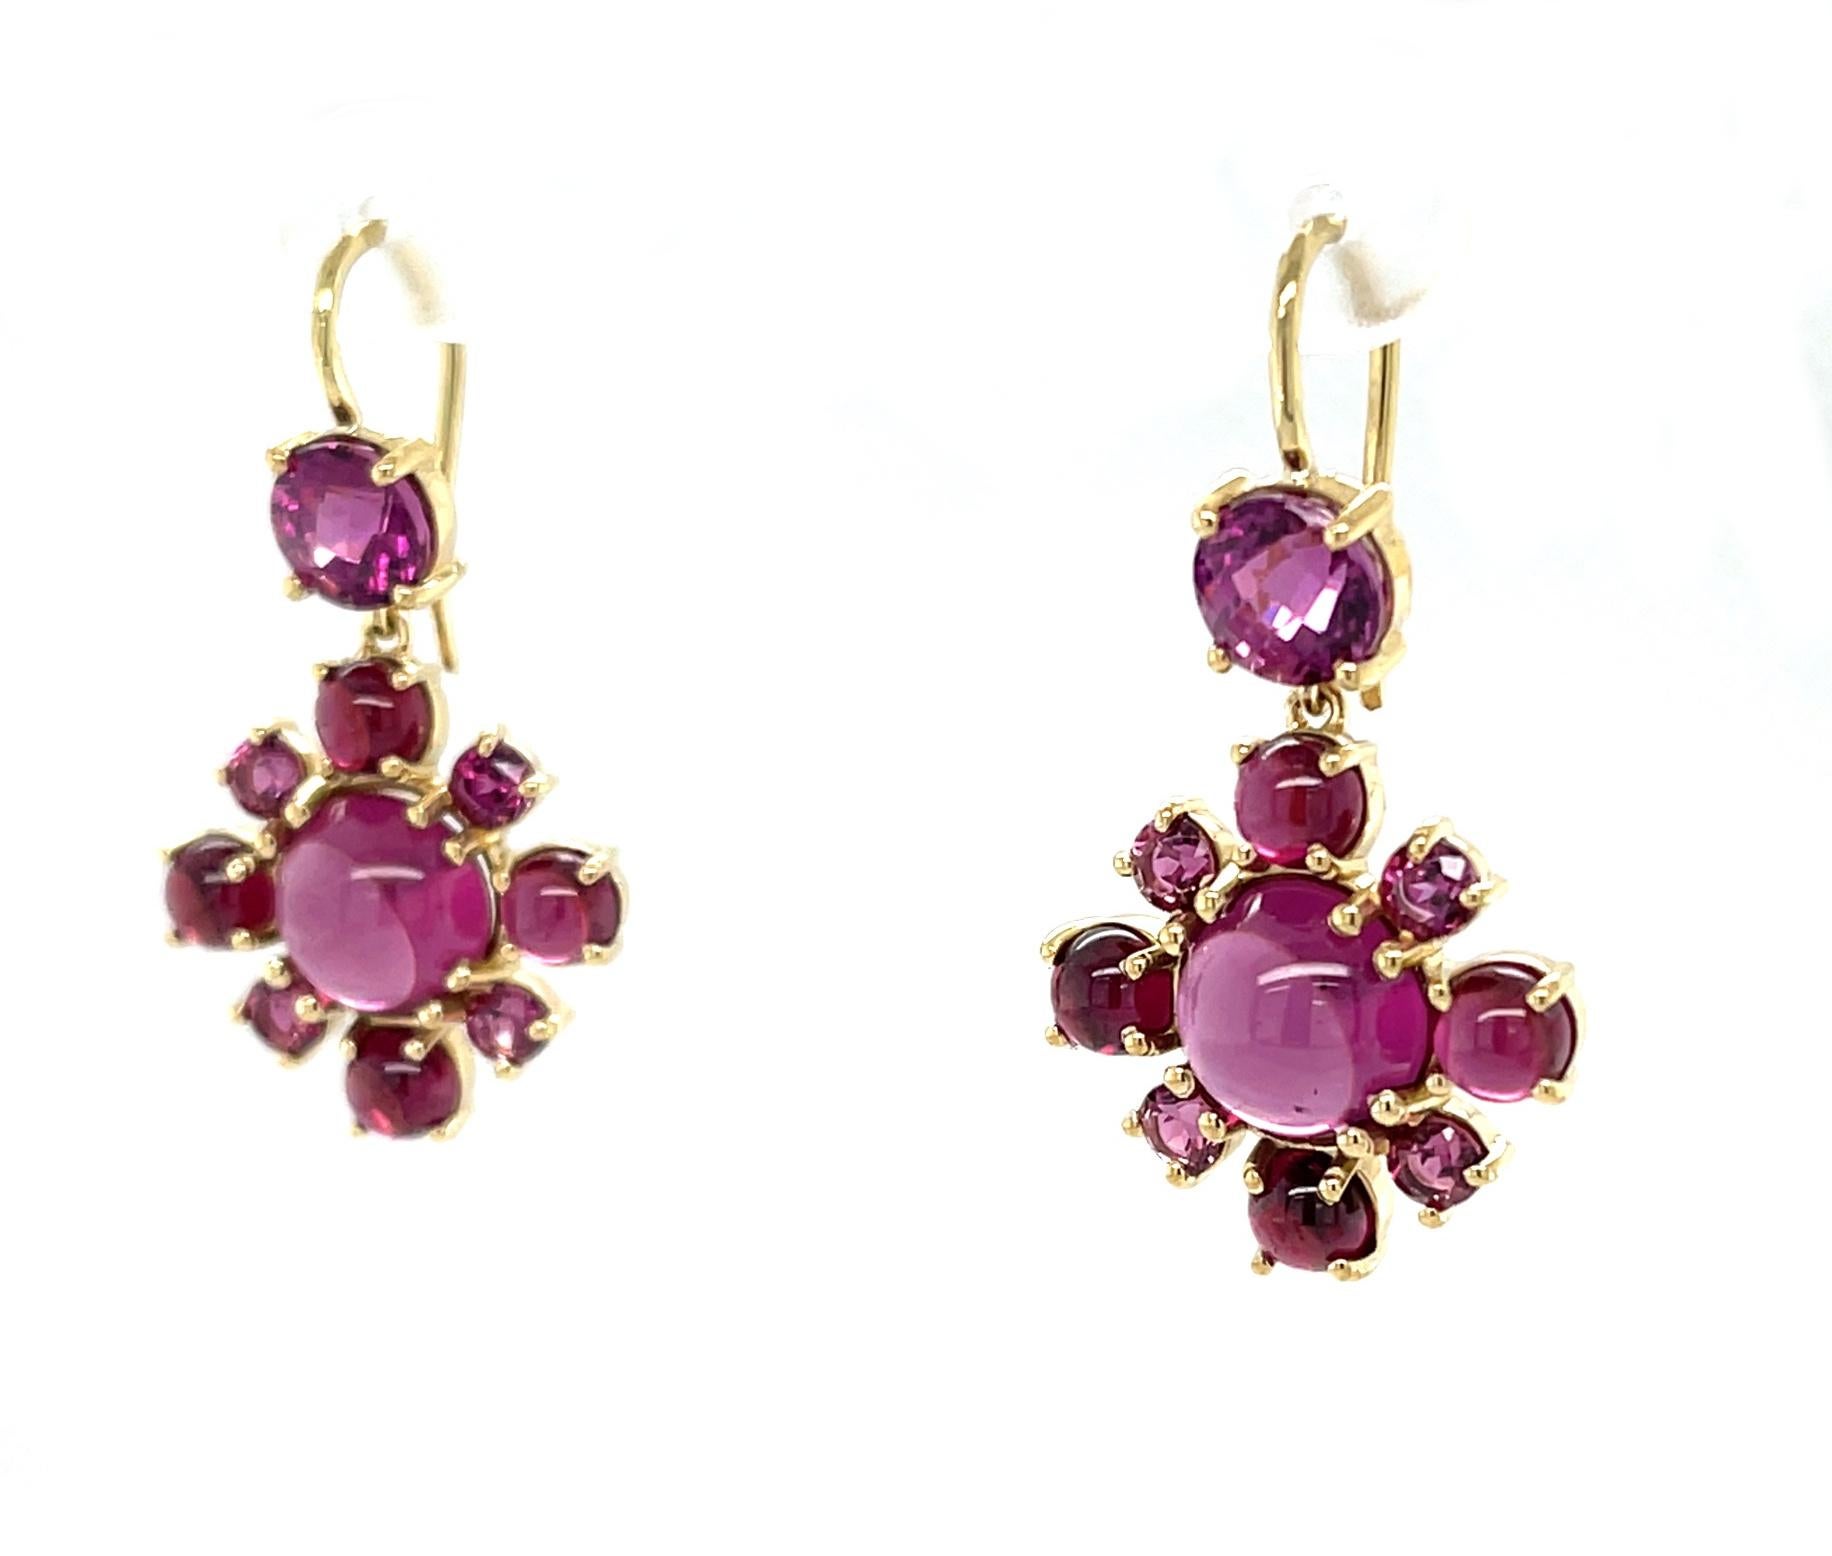 These pretty earrings are perfect for anyone who loves roses and gemstones! Beautifully custom-designed in 18k yellow gold, these original earrings feature a stunning collection of purplish-pink rhodolite garnets, whose name originates from the